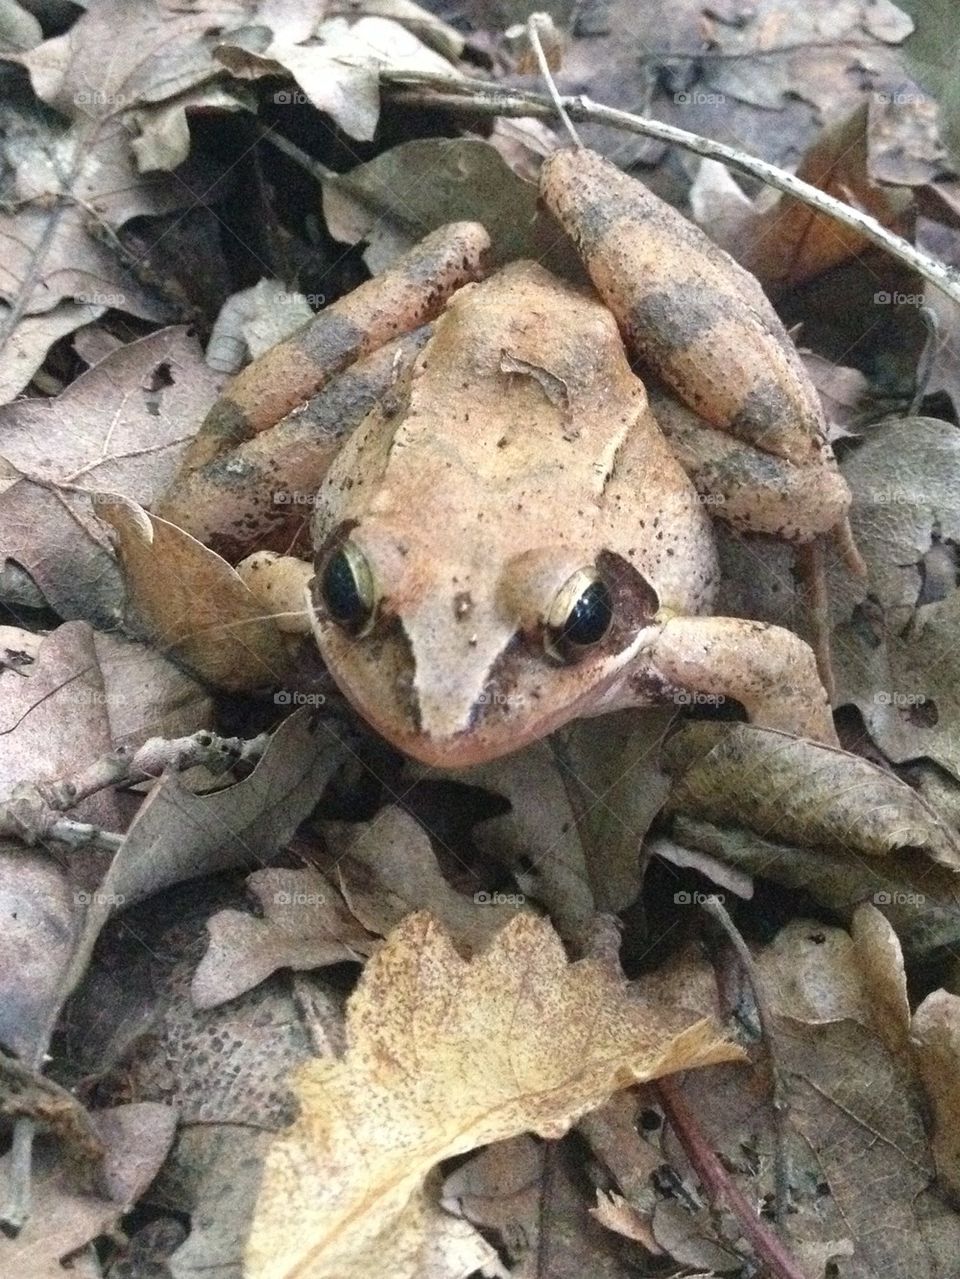 Forests frog